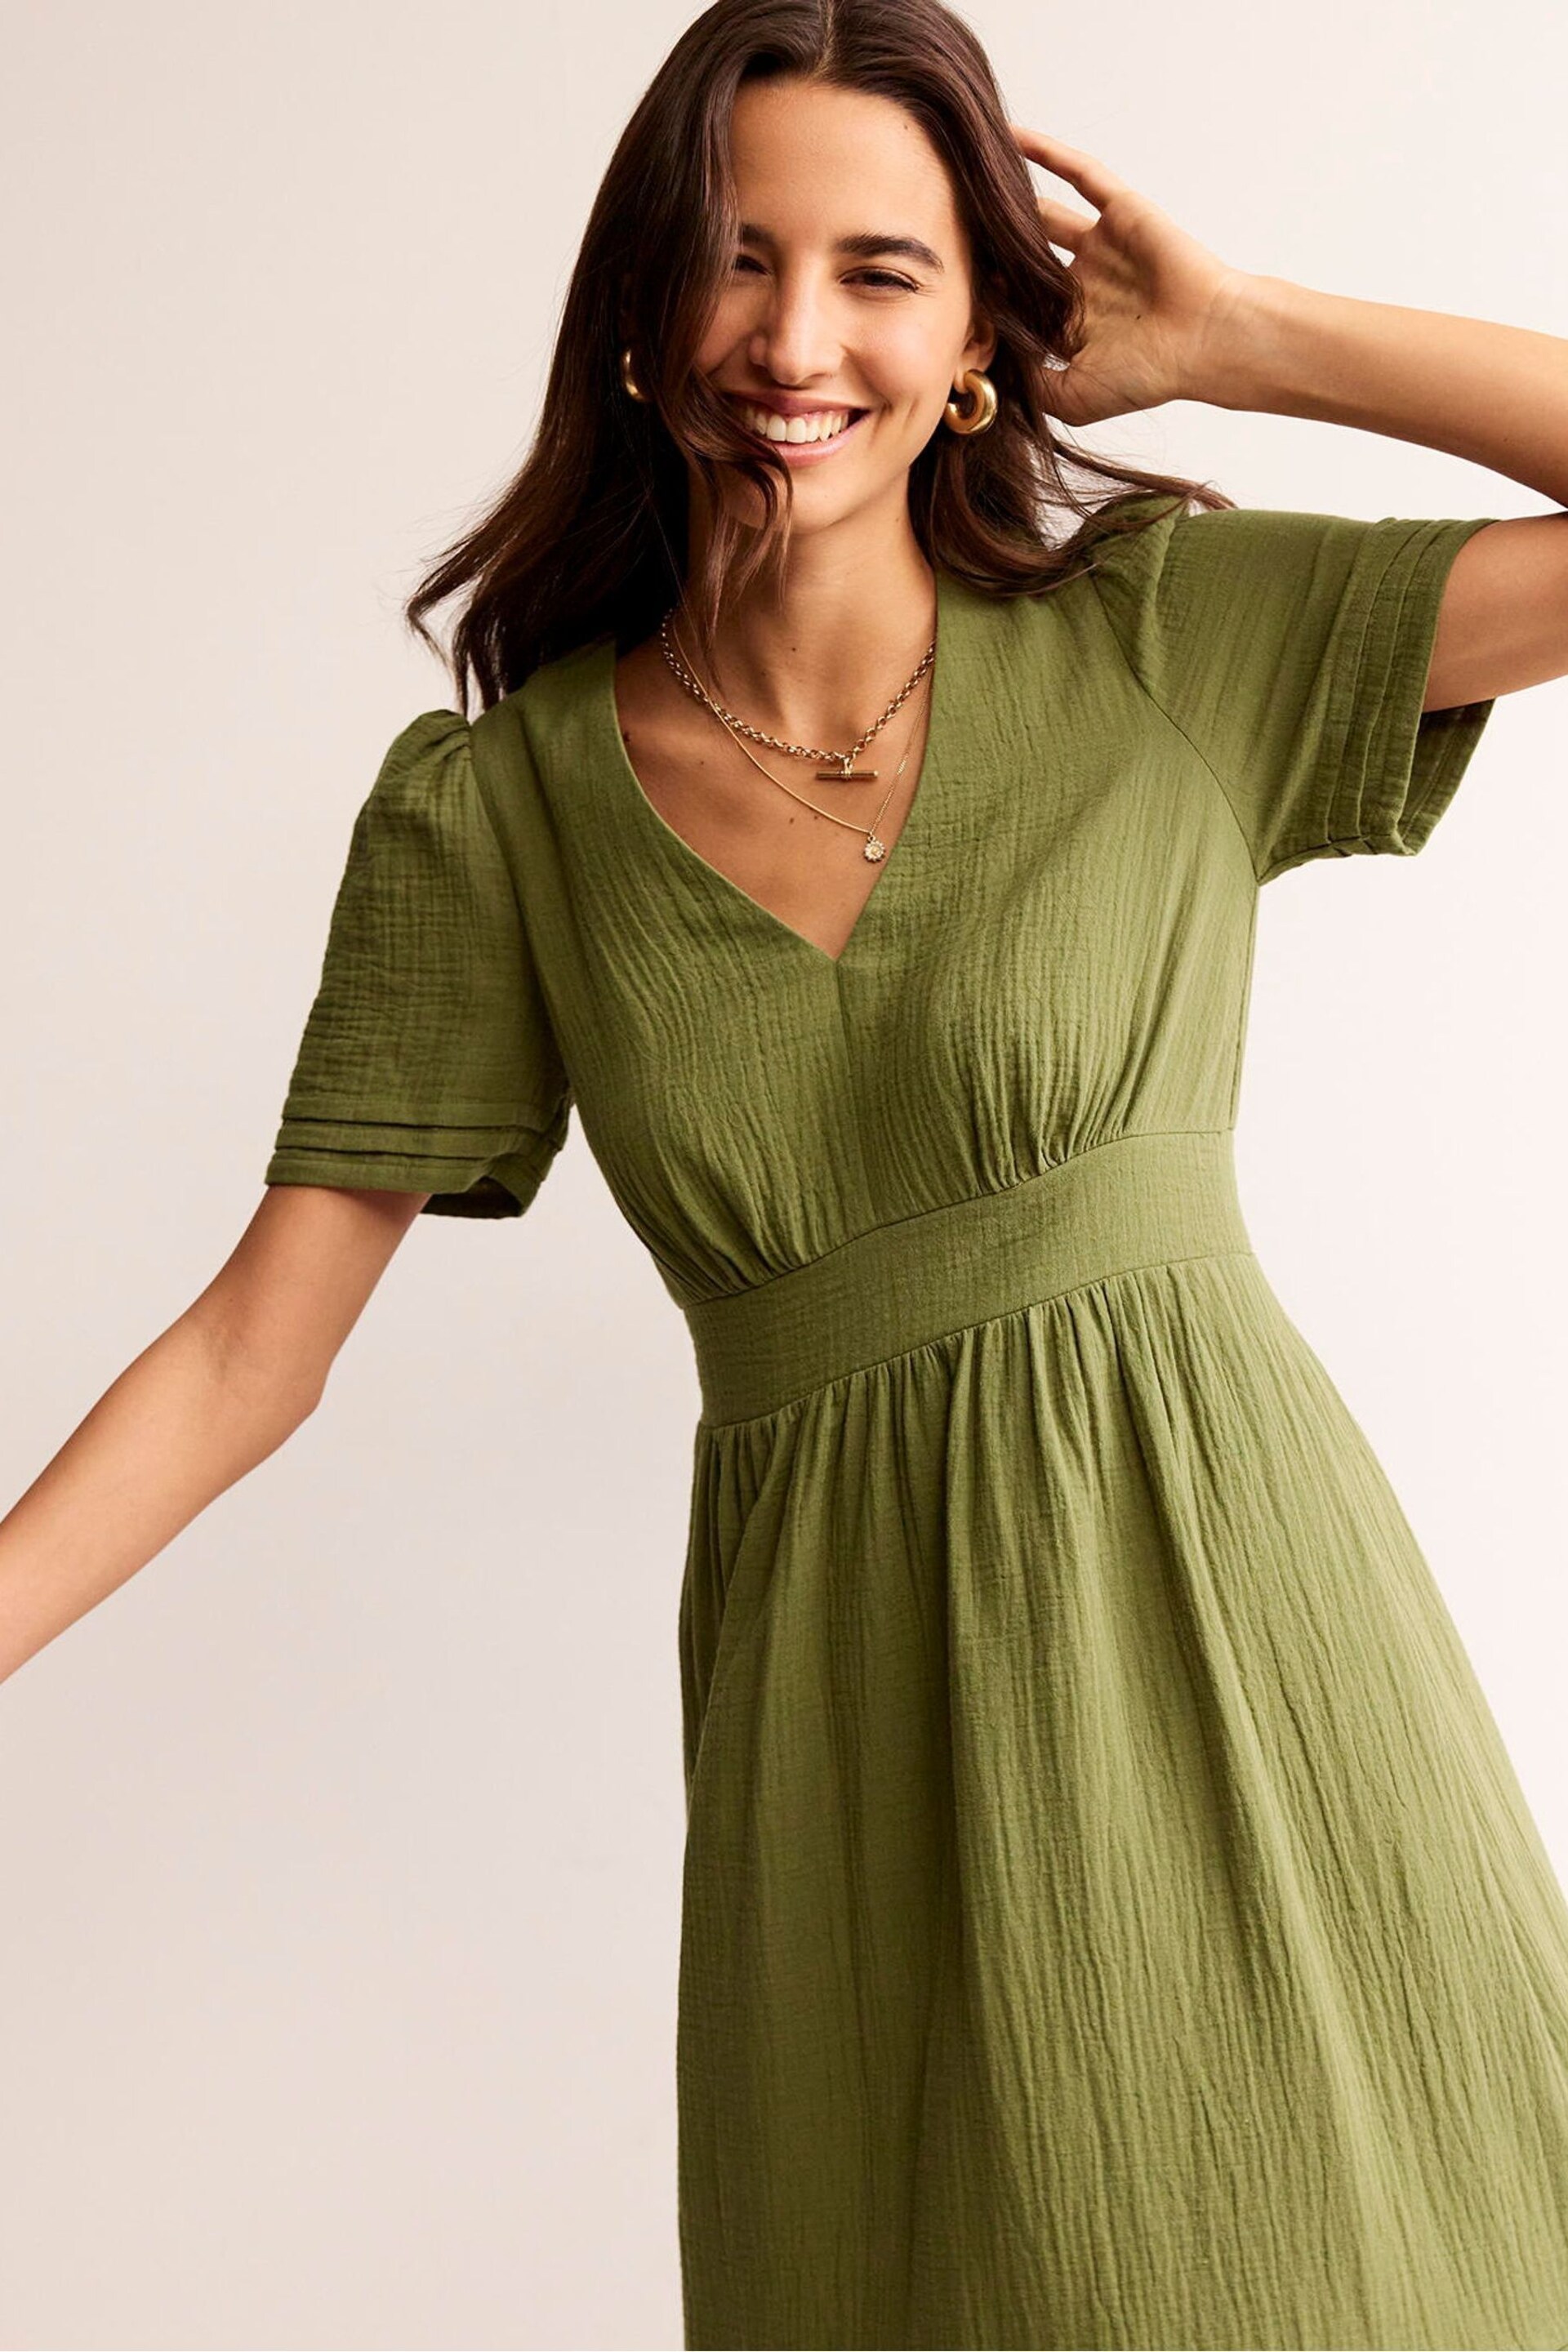 Boden Green Petite Eve Double Cloth Midi Dress - Image 2 of 5